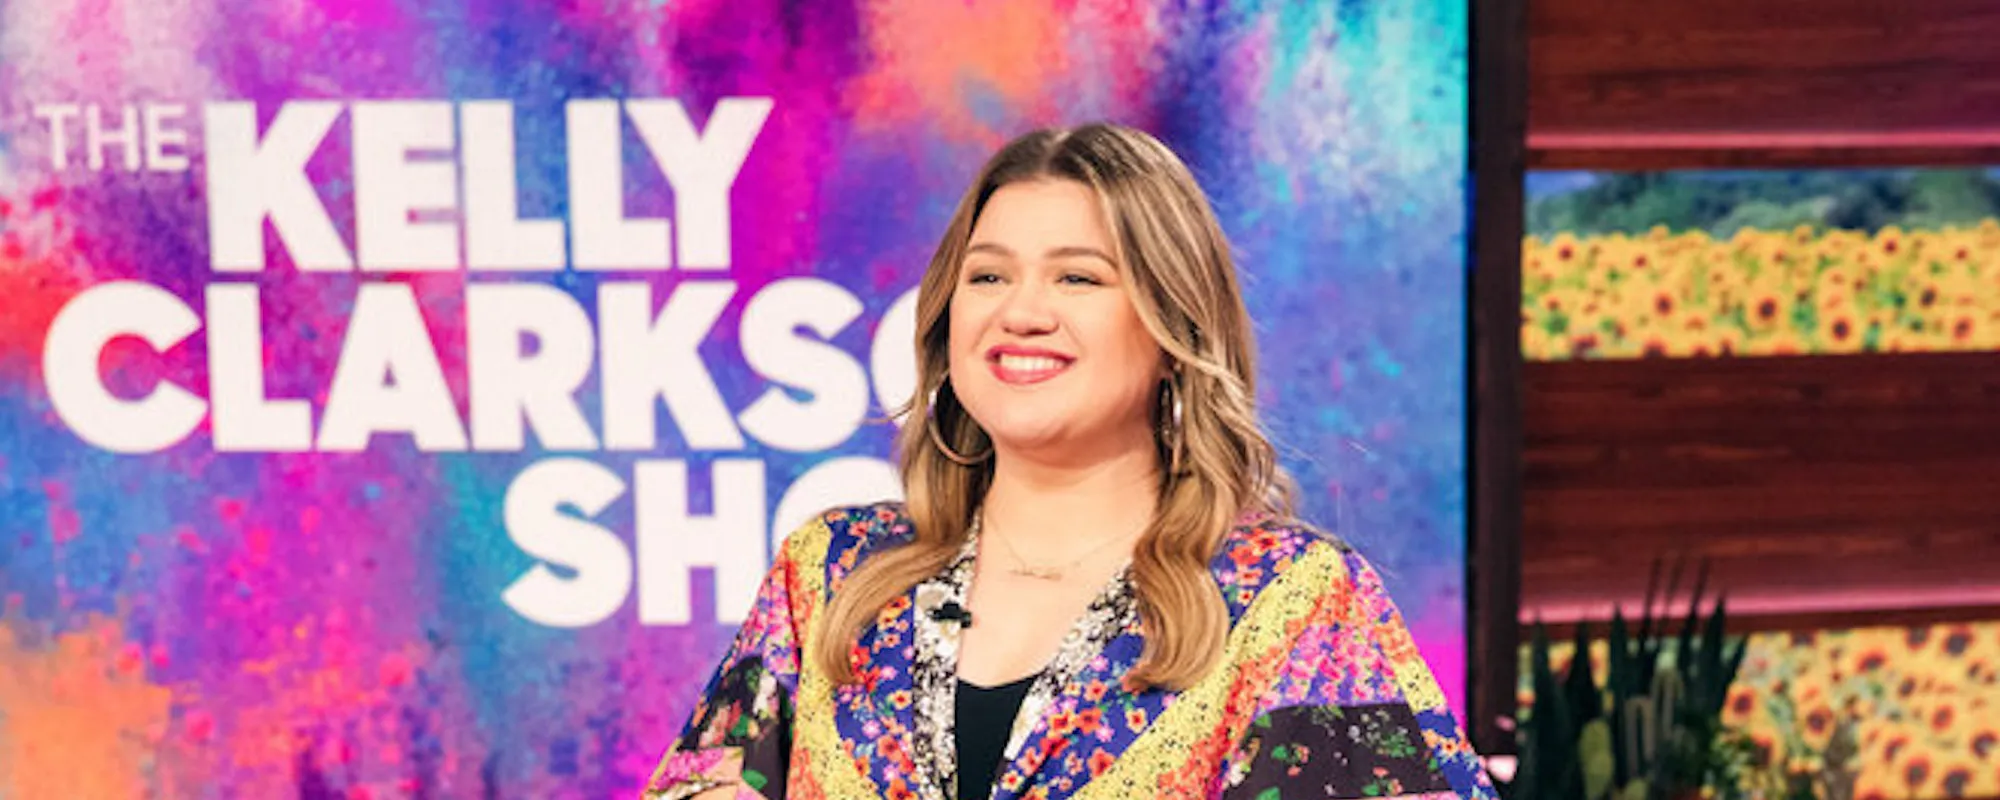 Kelly Clarkson Offers Five Kellyoke Performances Including “Boot Scootin’ Boogie” by Brooks & Dunn